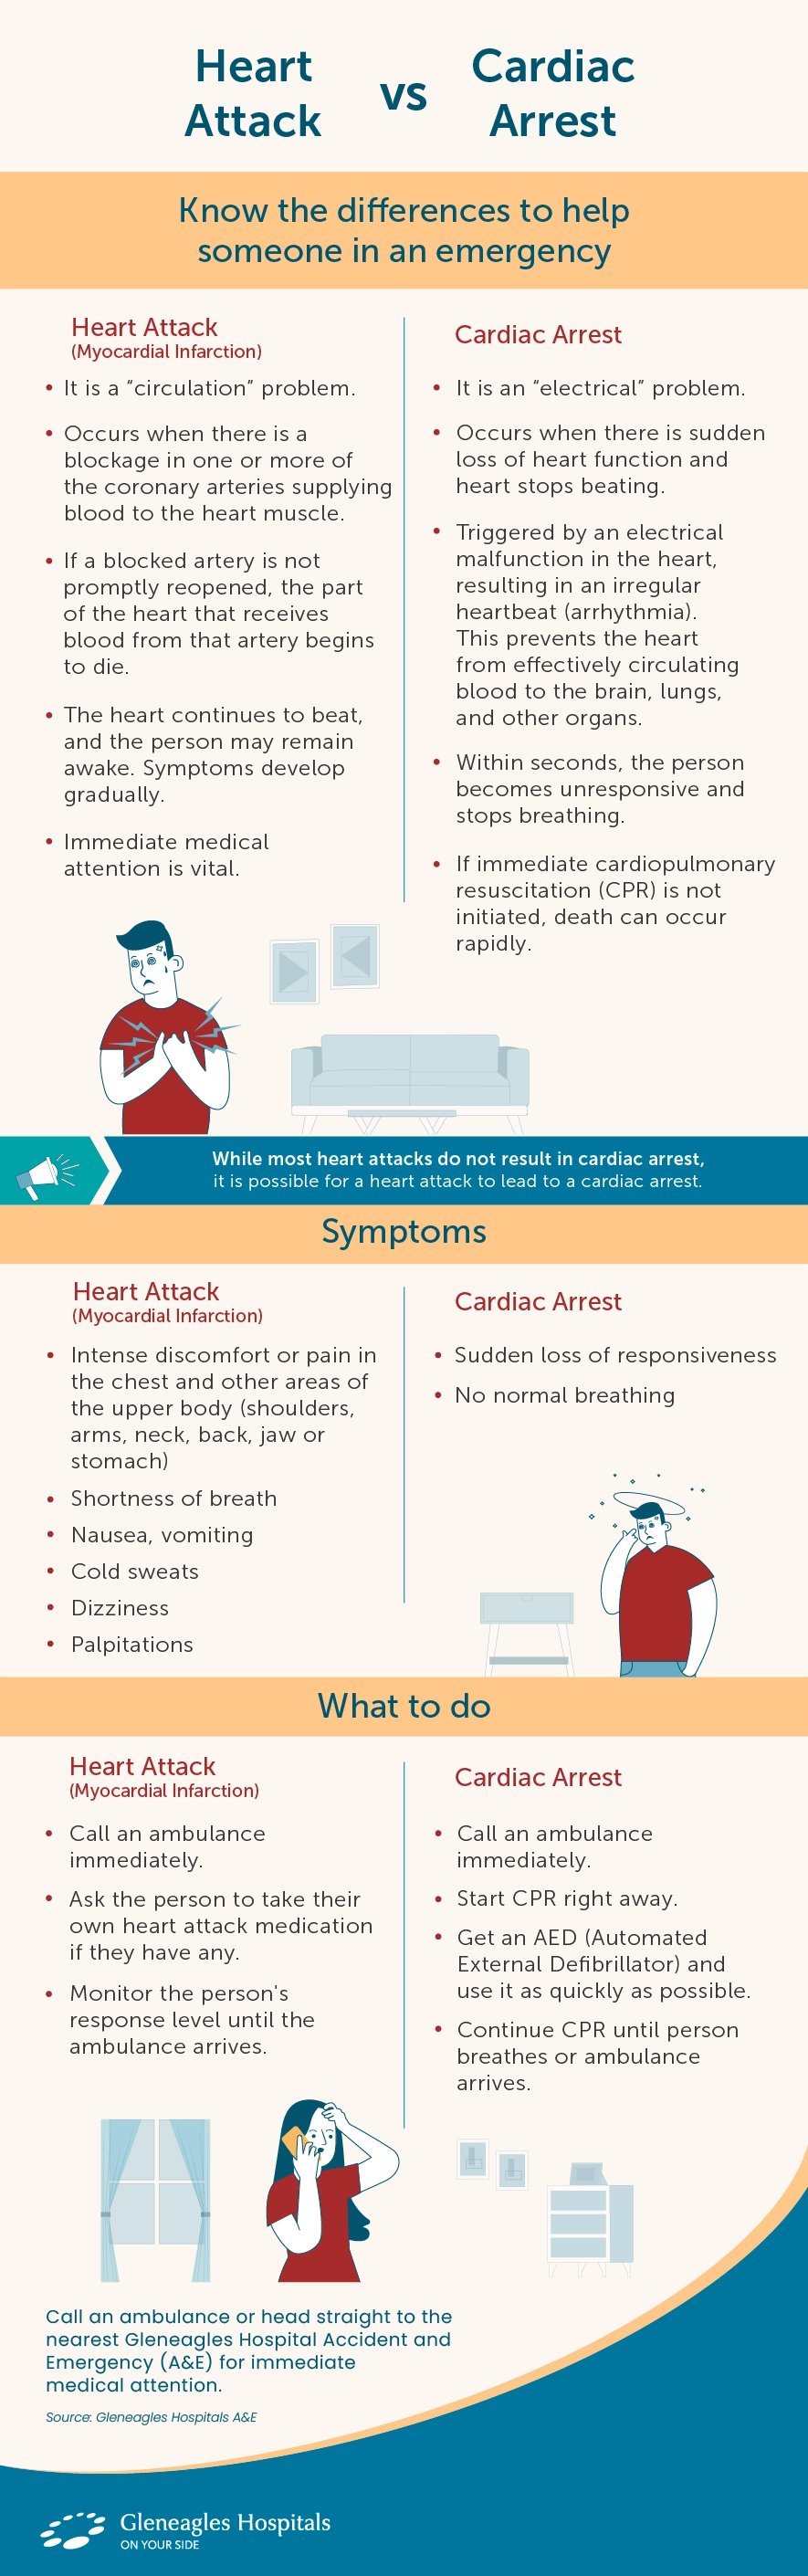 symptoms of the heart attack and cardiac arrest and step-by-step measures